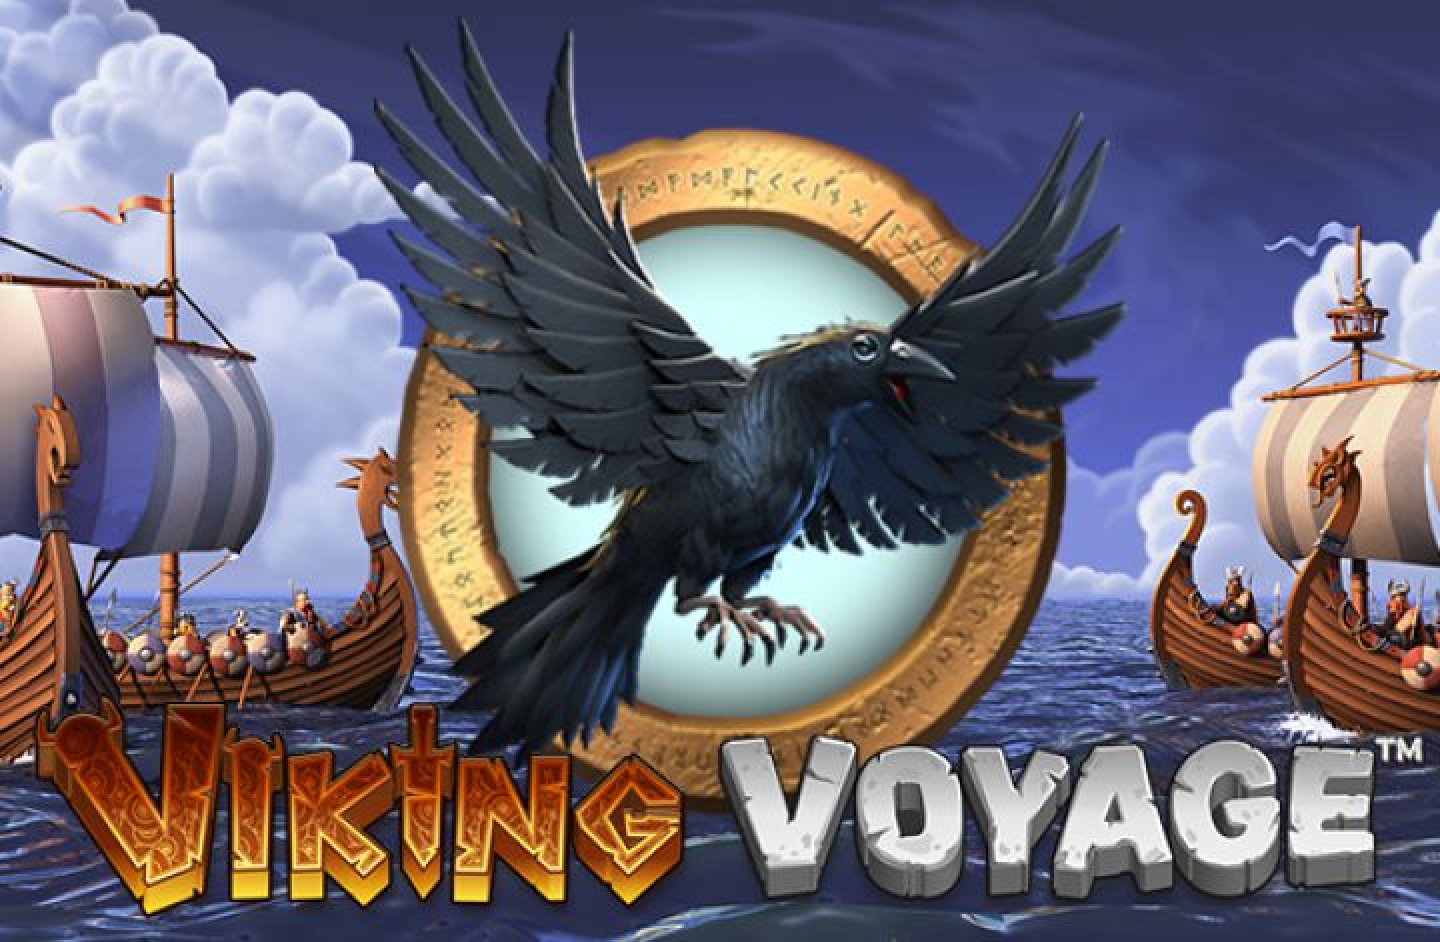 The Viking Voyage Online Slot Demo Game by Betsoft